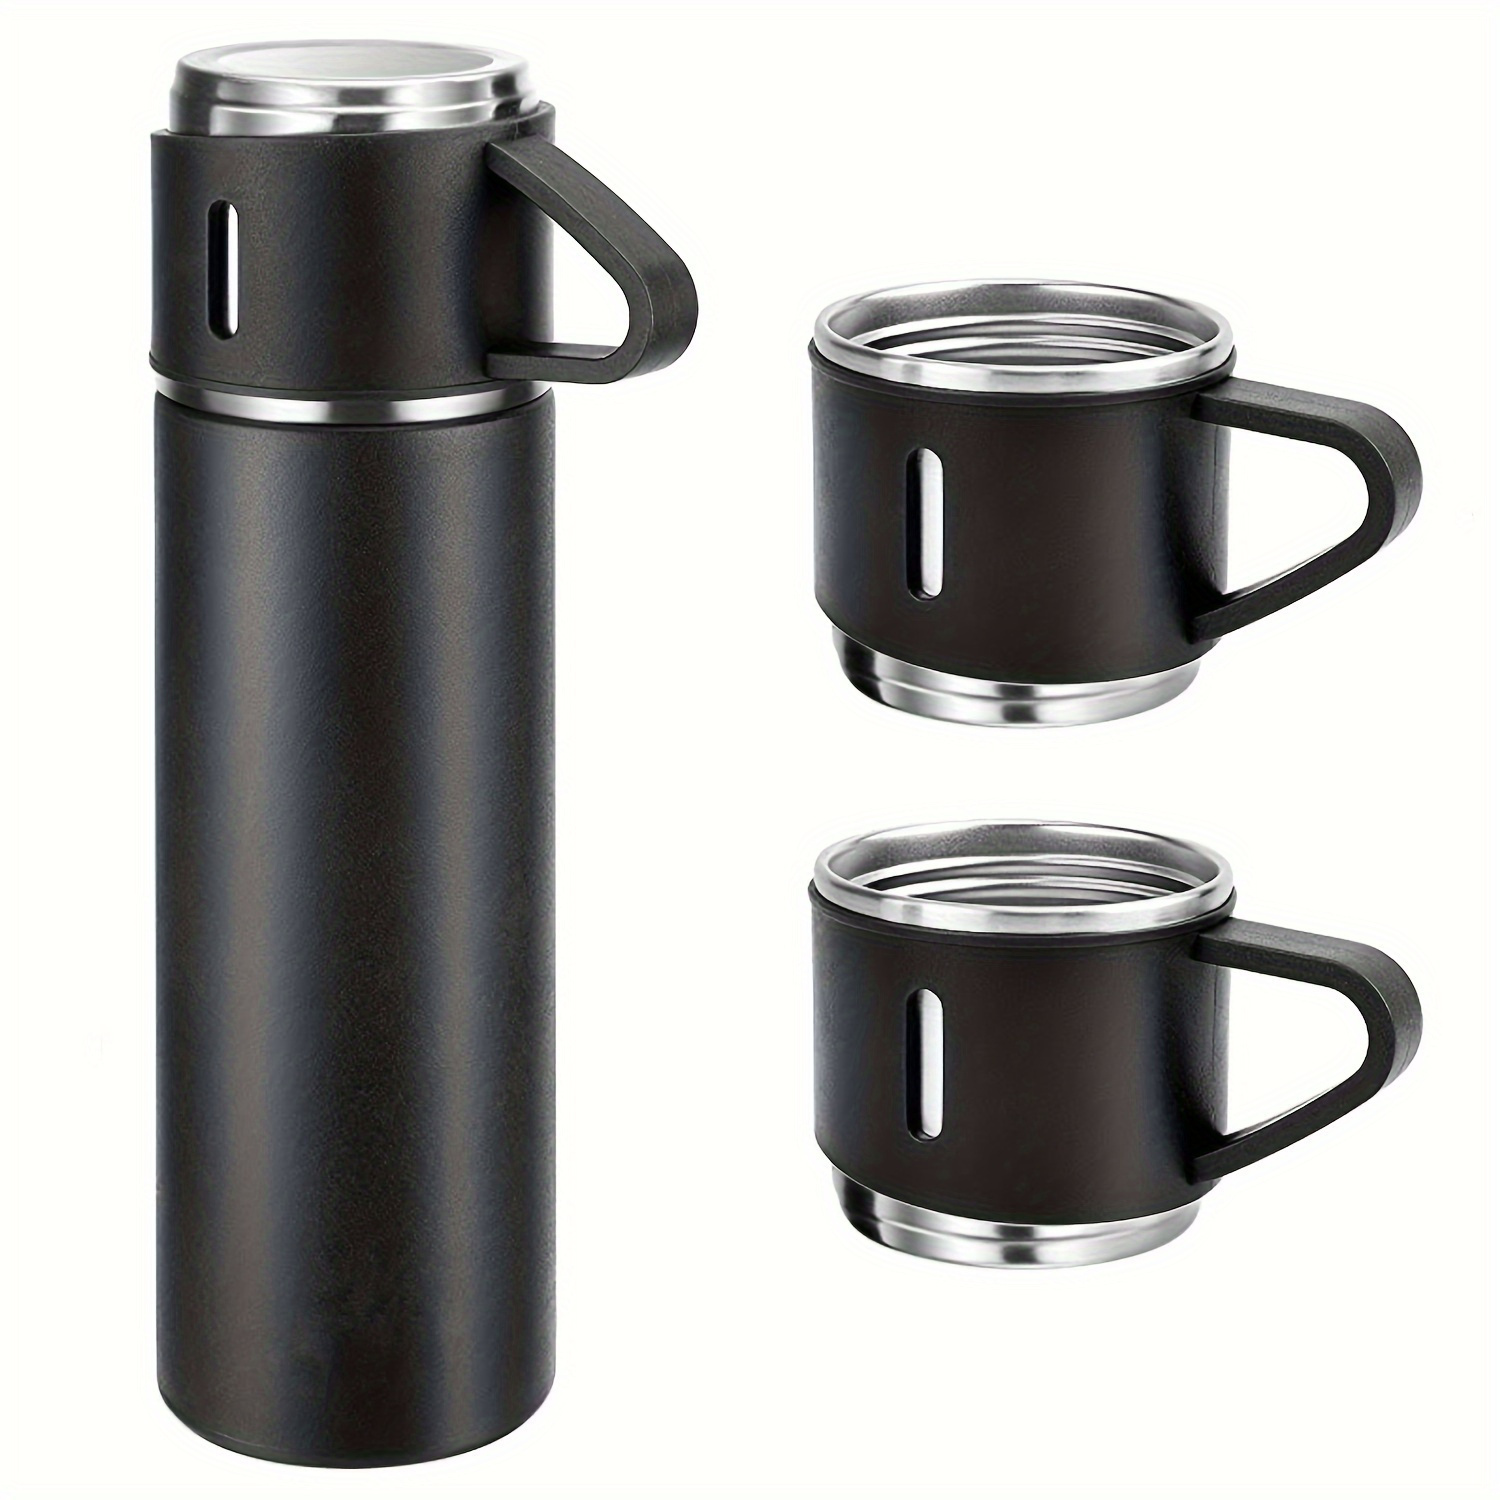 

Stainless Steel Vacuum Insulated Set 16.9oz - Business Thermal Mug With Cup For Coffee, Hot & Cold Drinks, Bbq & Outdoor Cooking, Food-safe, 500ml